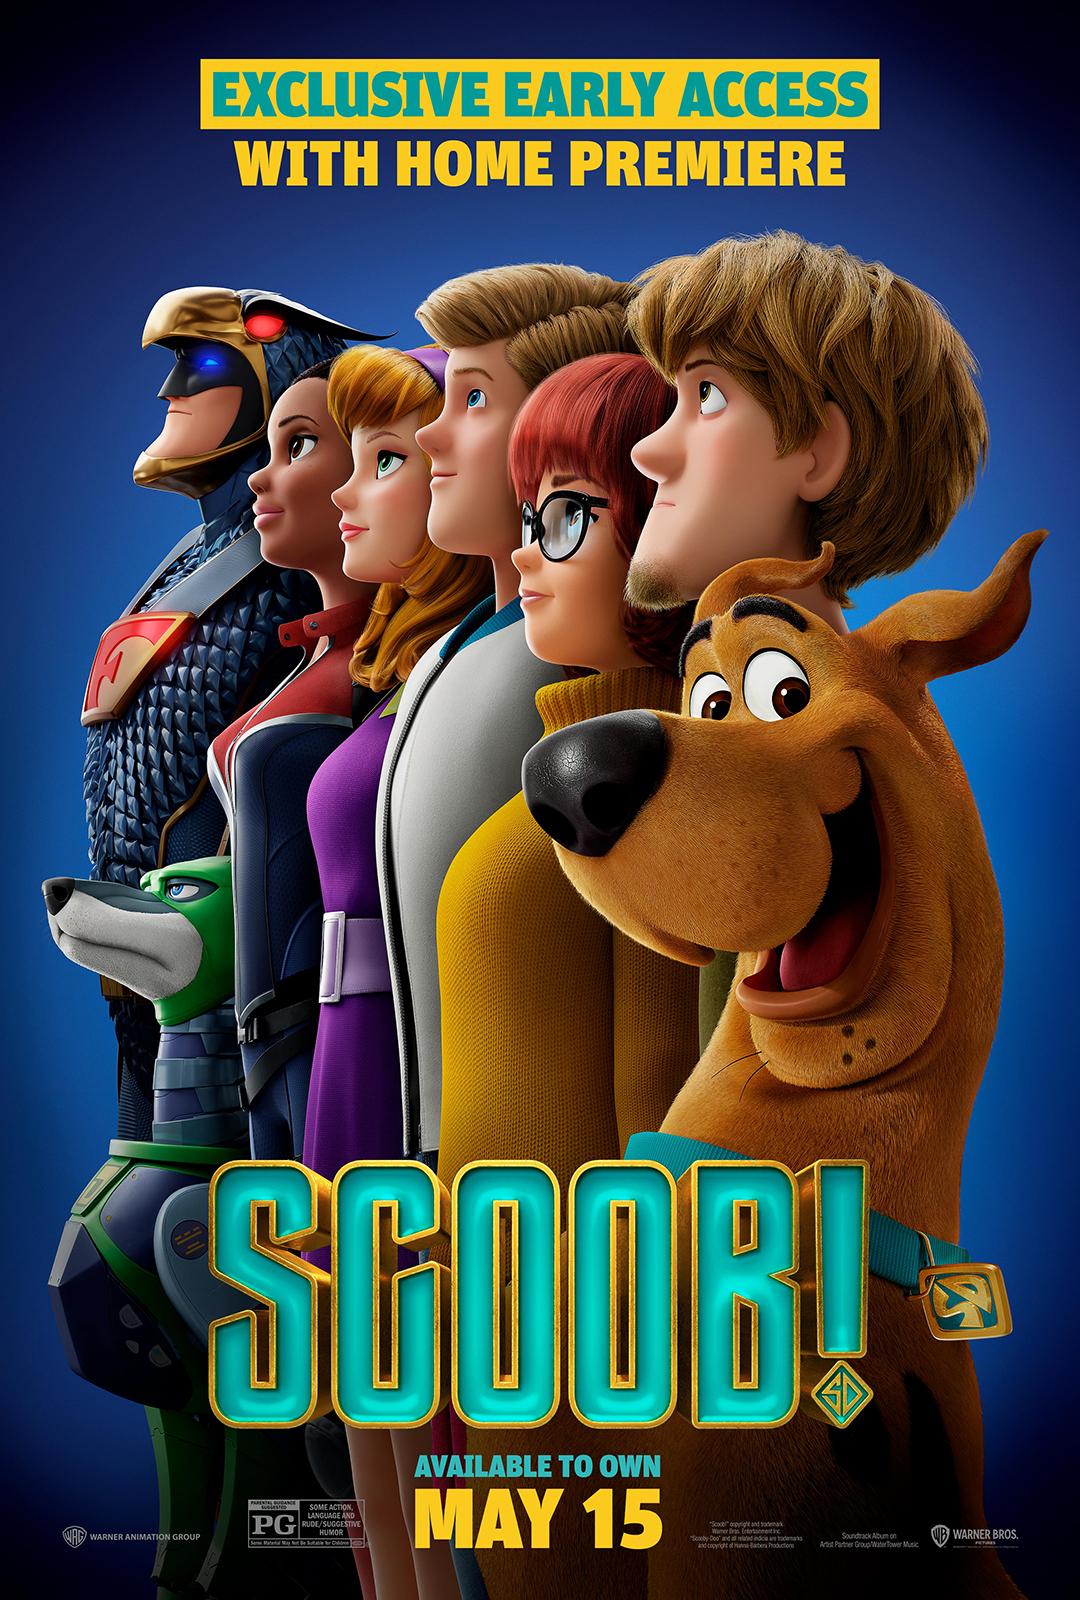 Scoob! Home Premiere Event on Twitter Announced for May 15